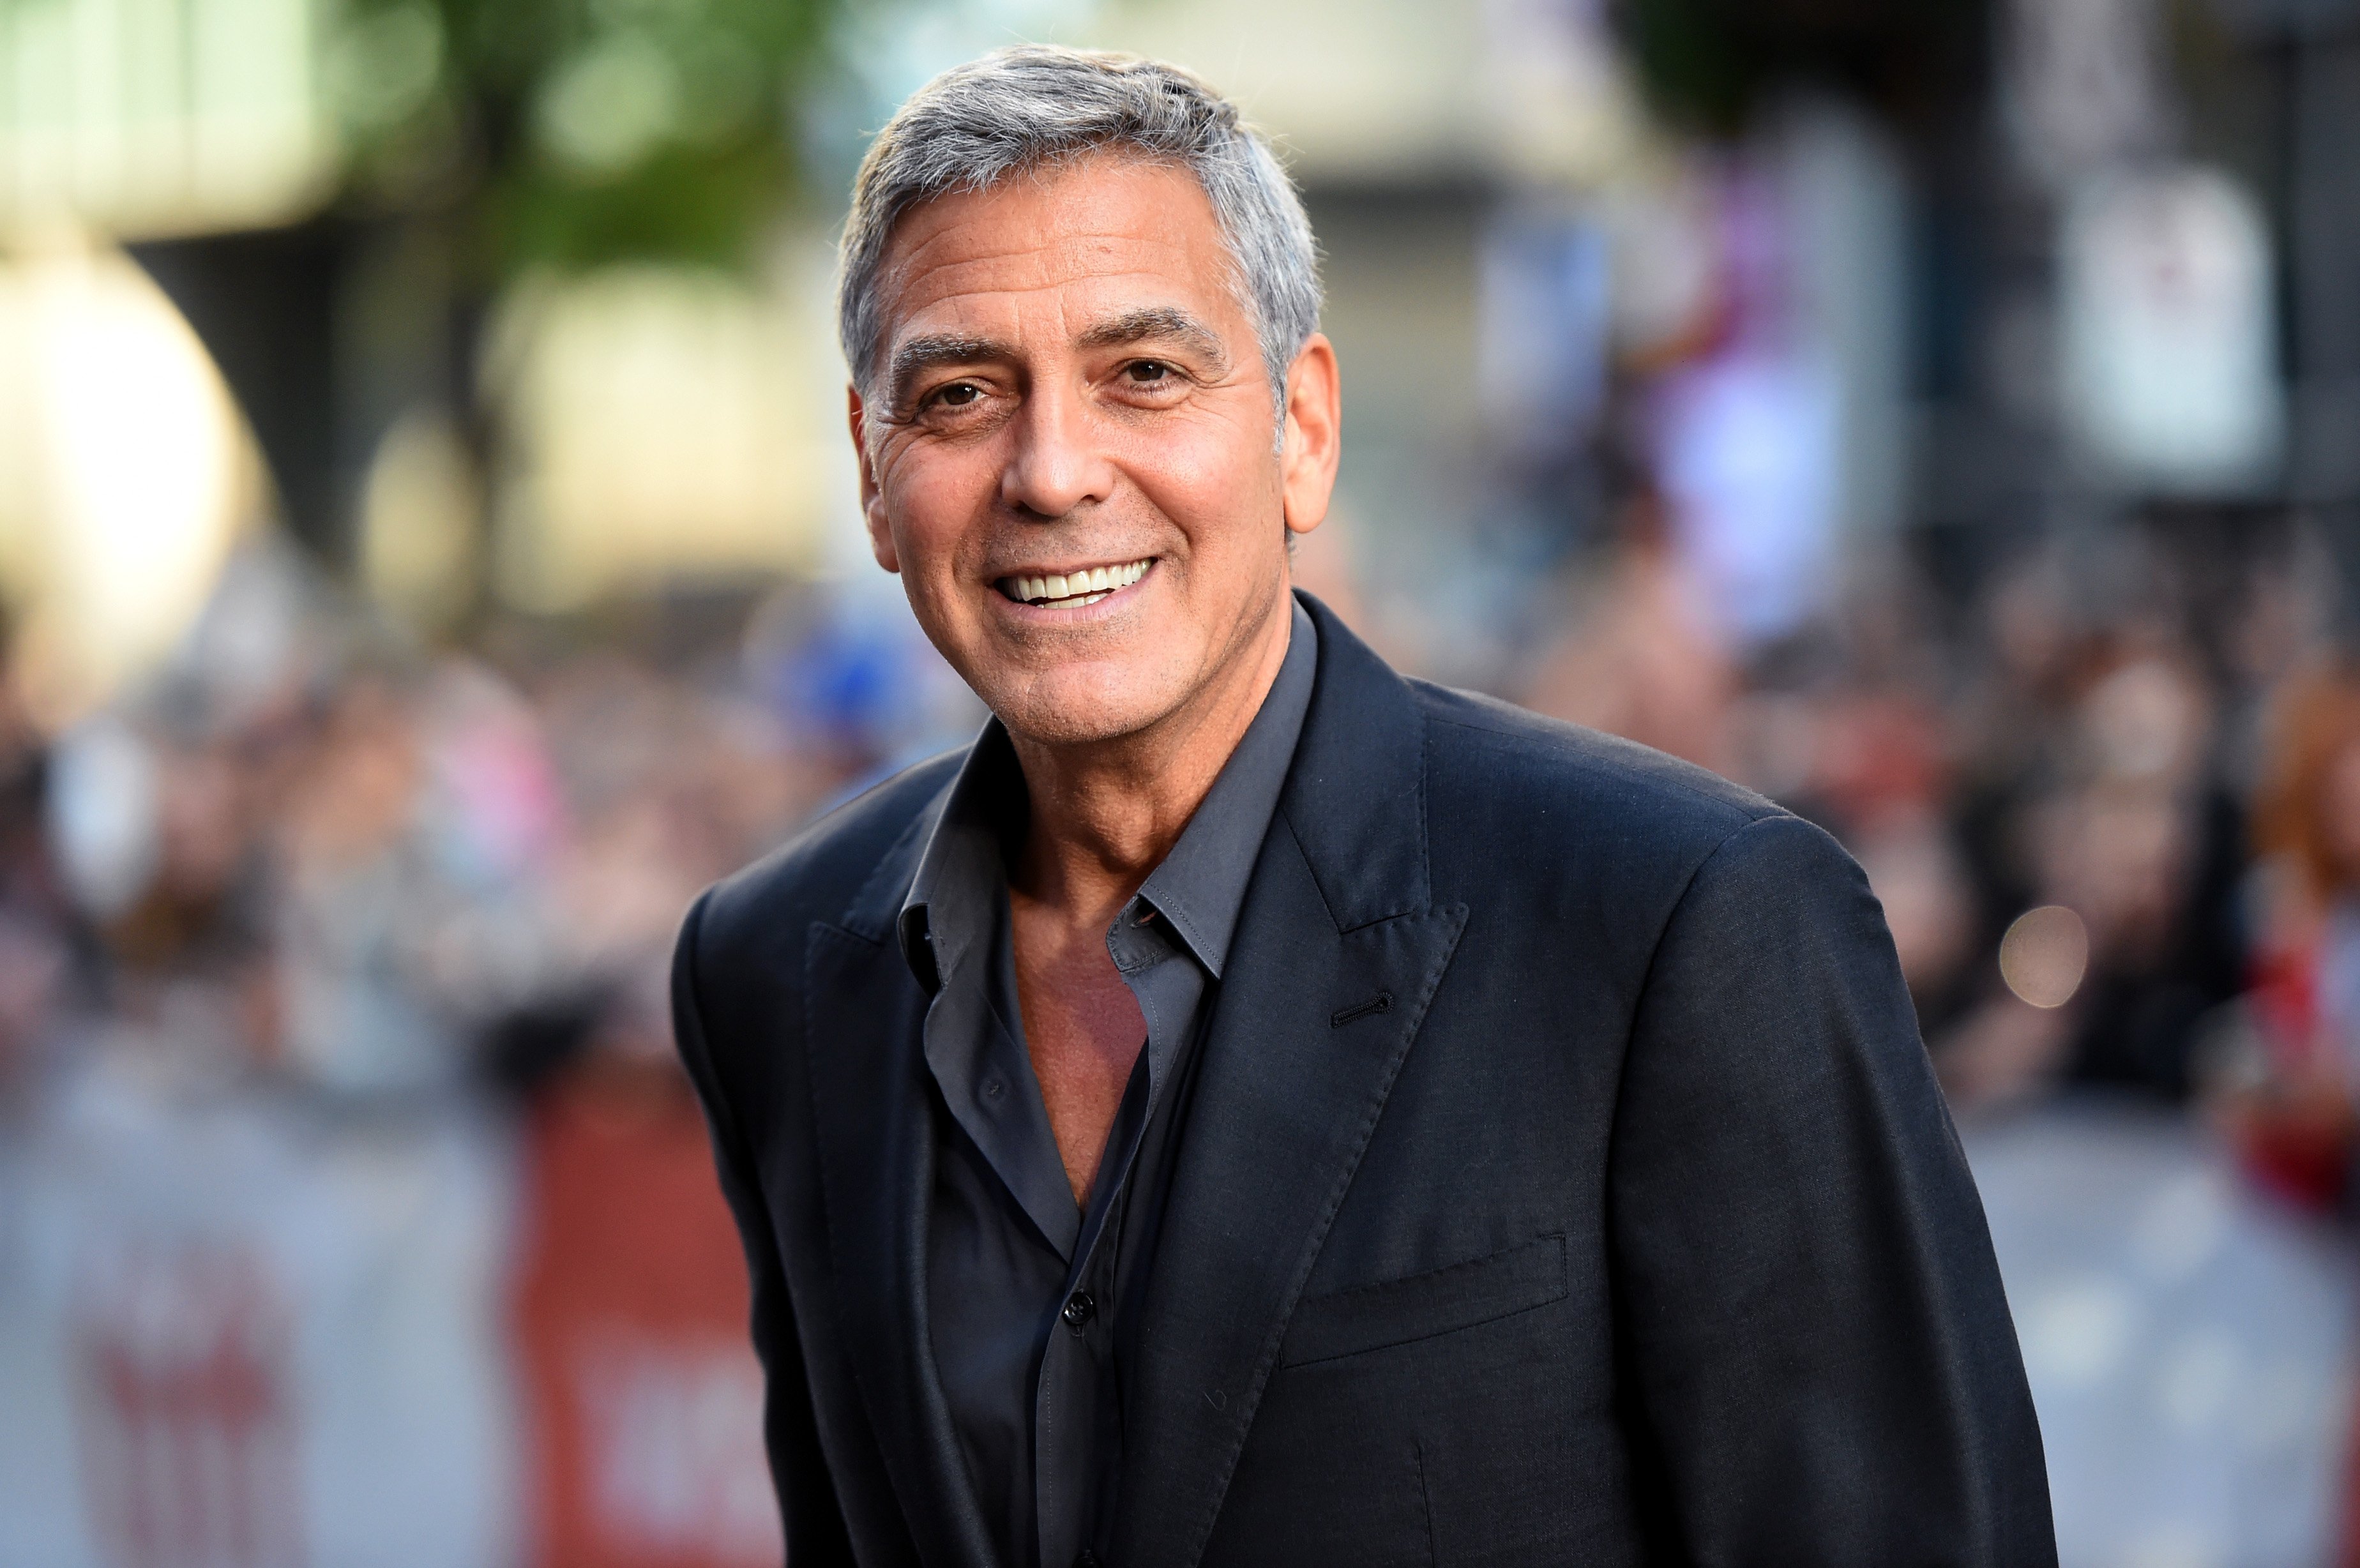 You got: George Clooney! 💖 Make Your Tinder Profile and We’ll Give You Your Celebrity Match